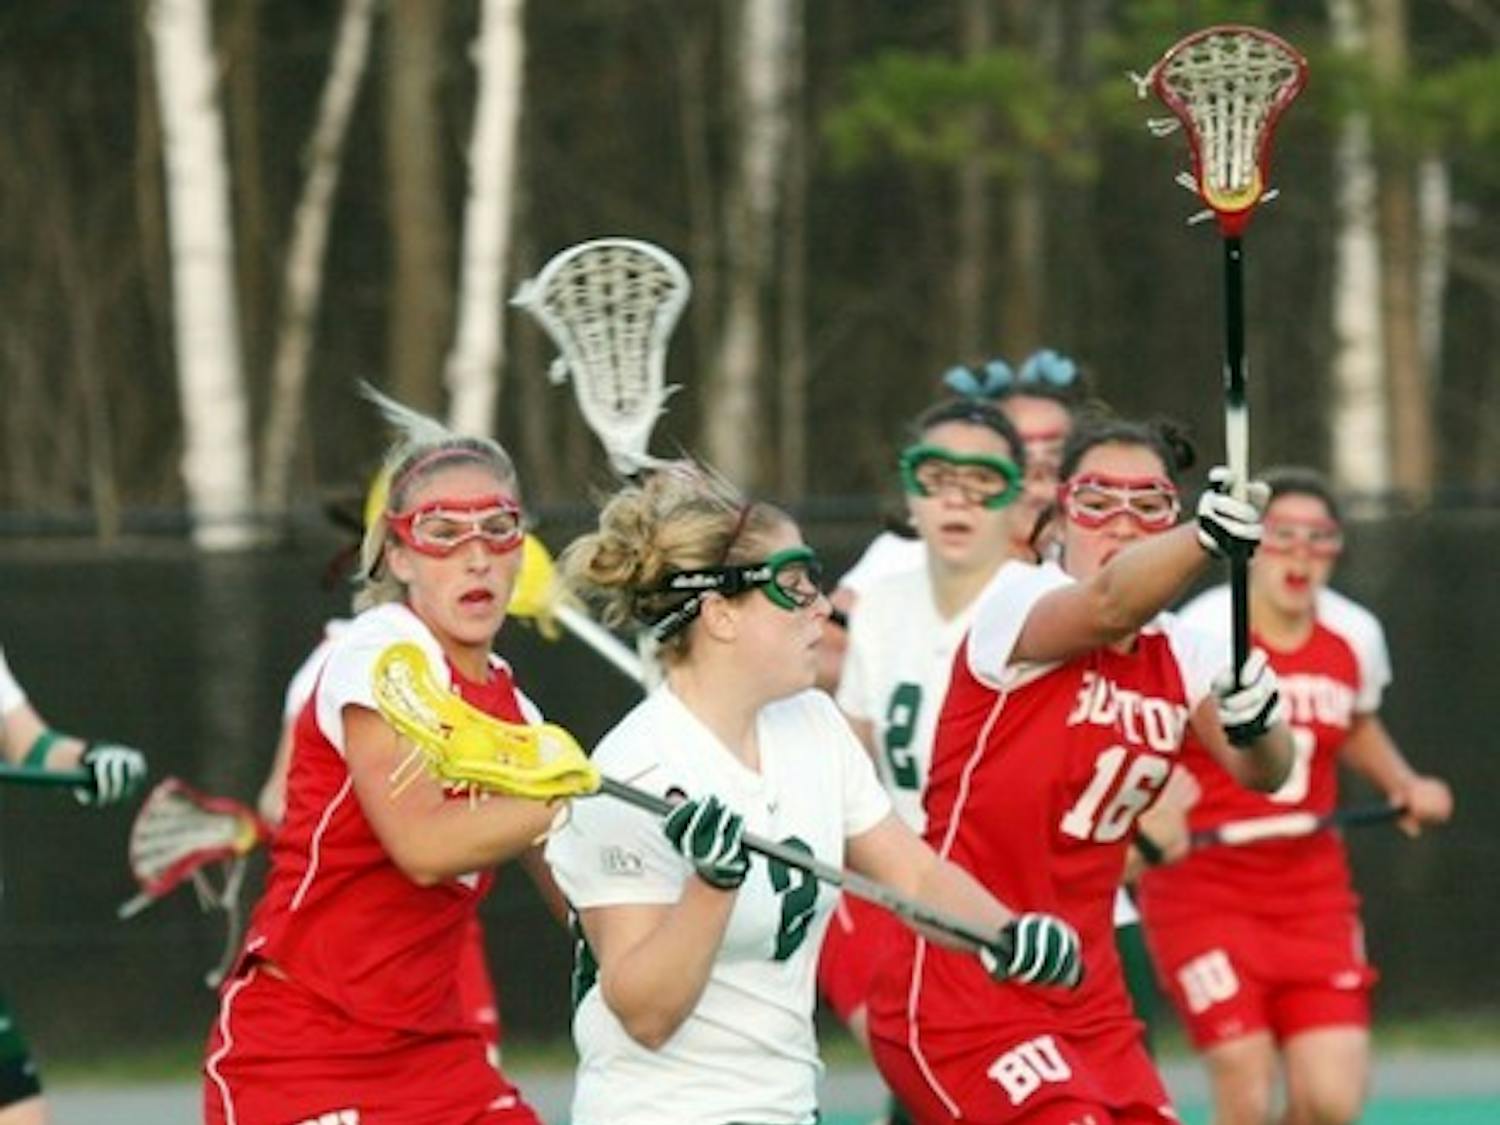 The women's lacrosse team is gearing up to play Princeton this weekend.